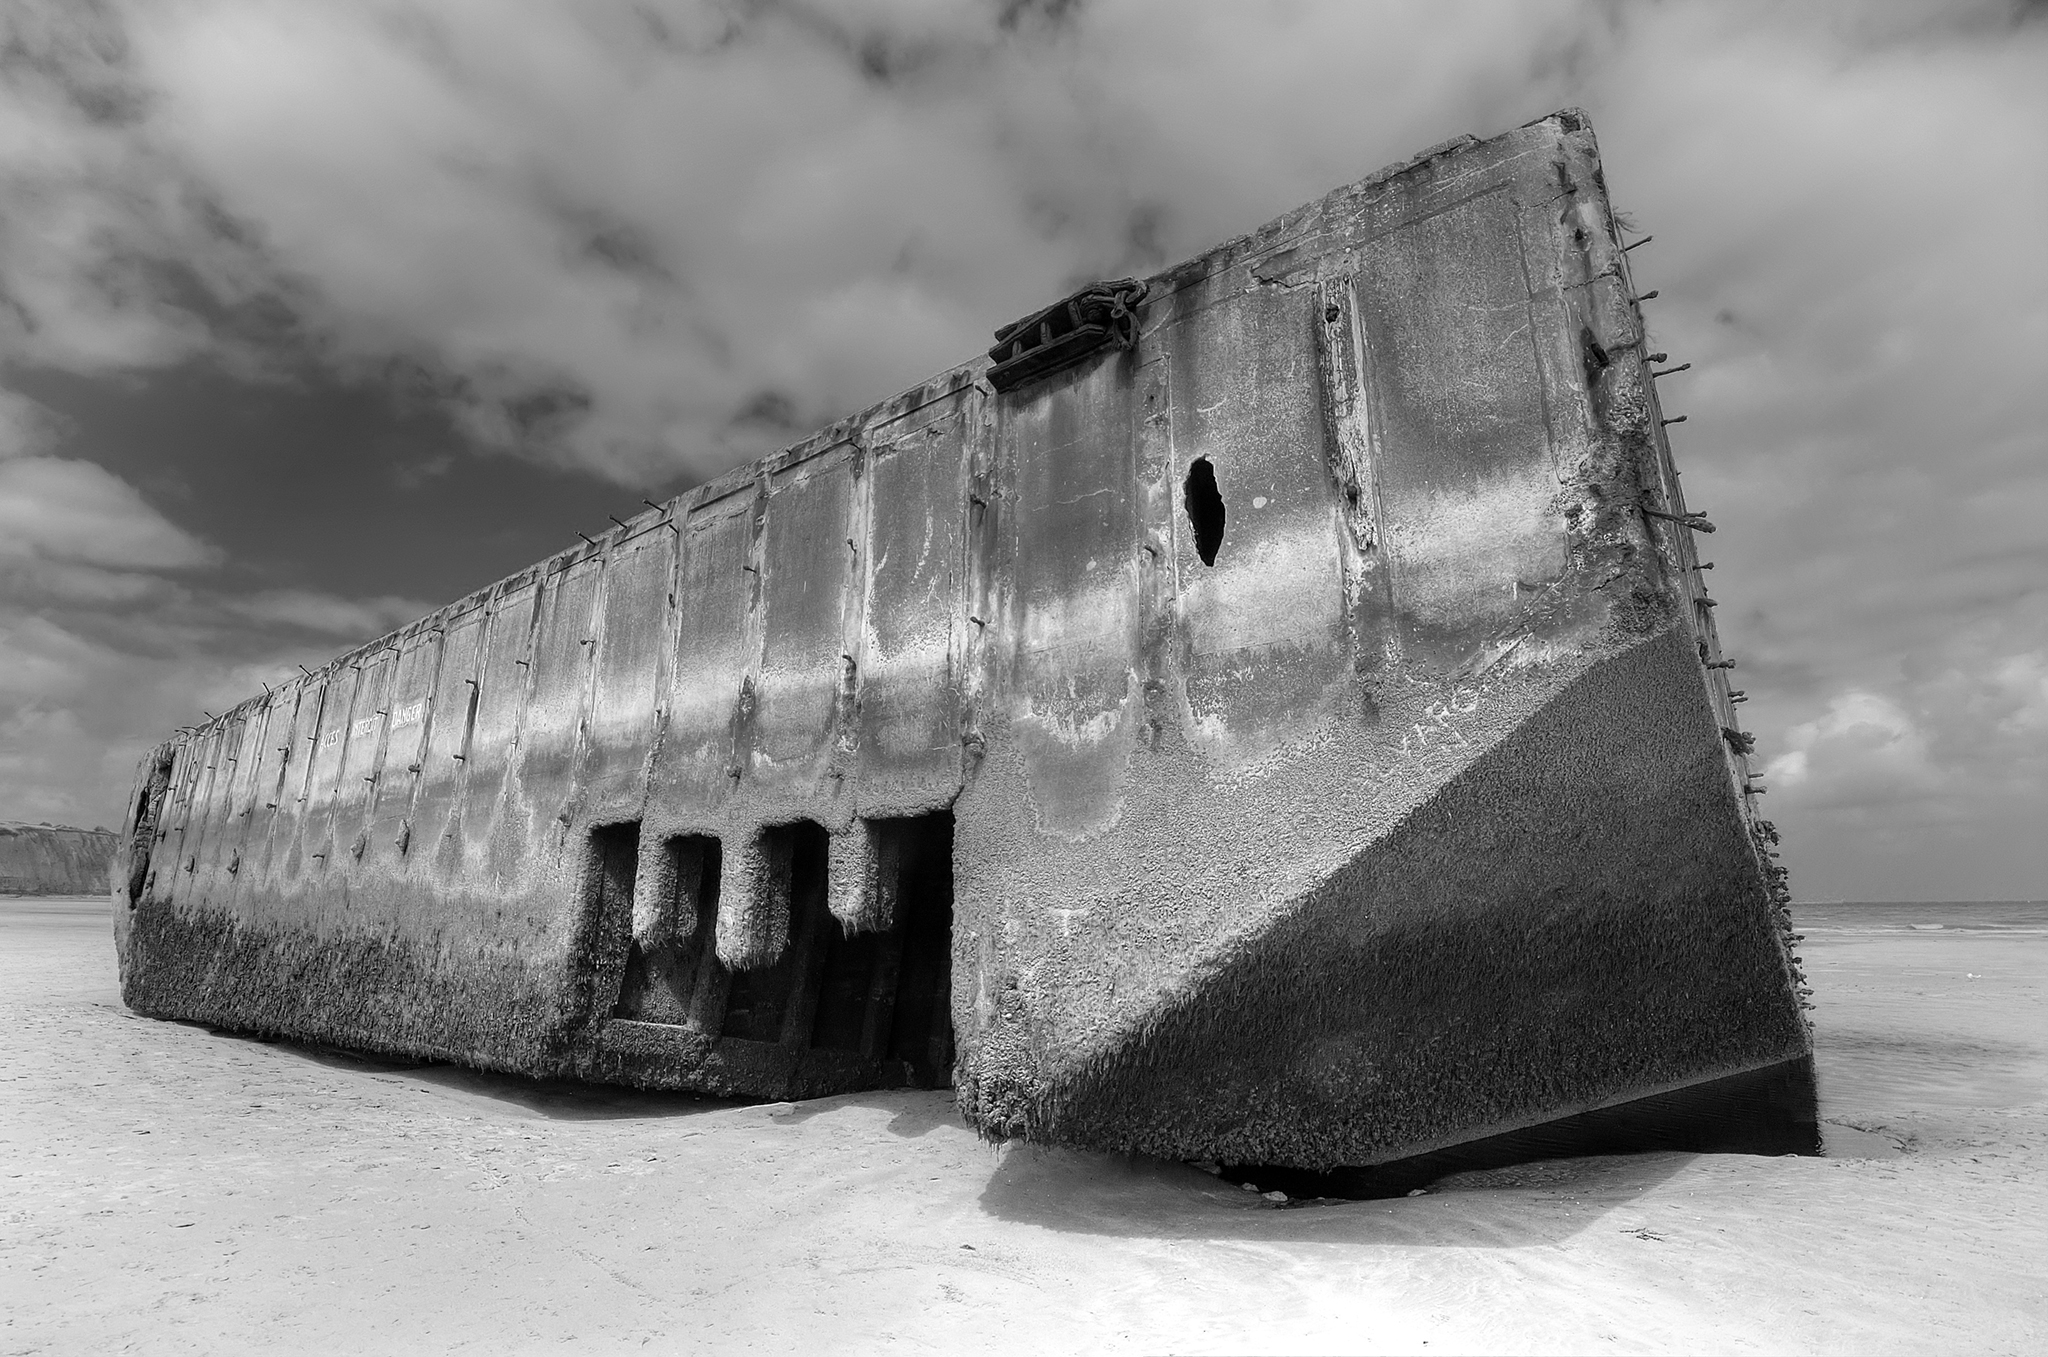 Remains from the Mulberry Harbour in Arromanches-les-Bains